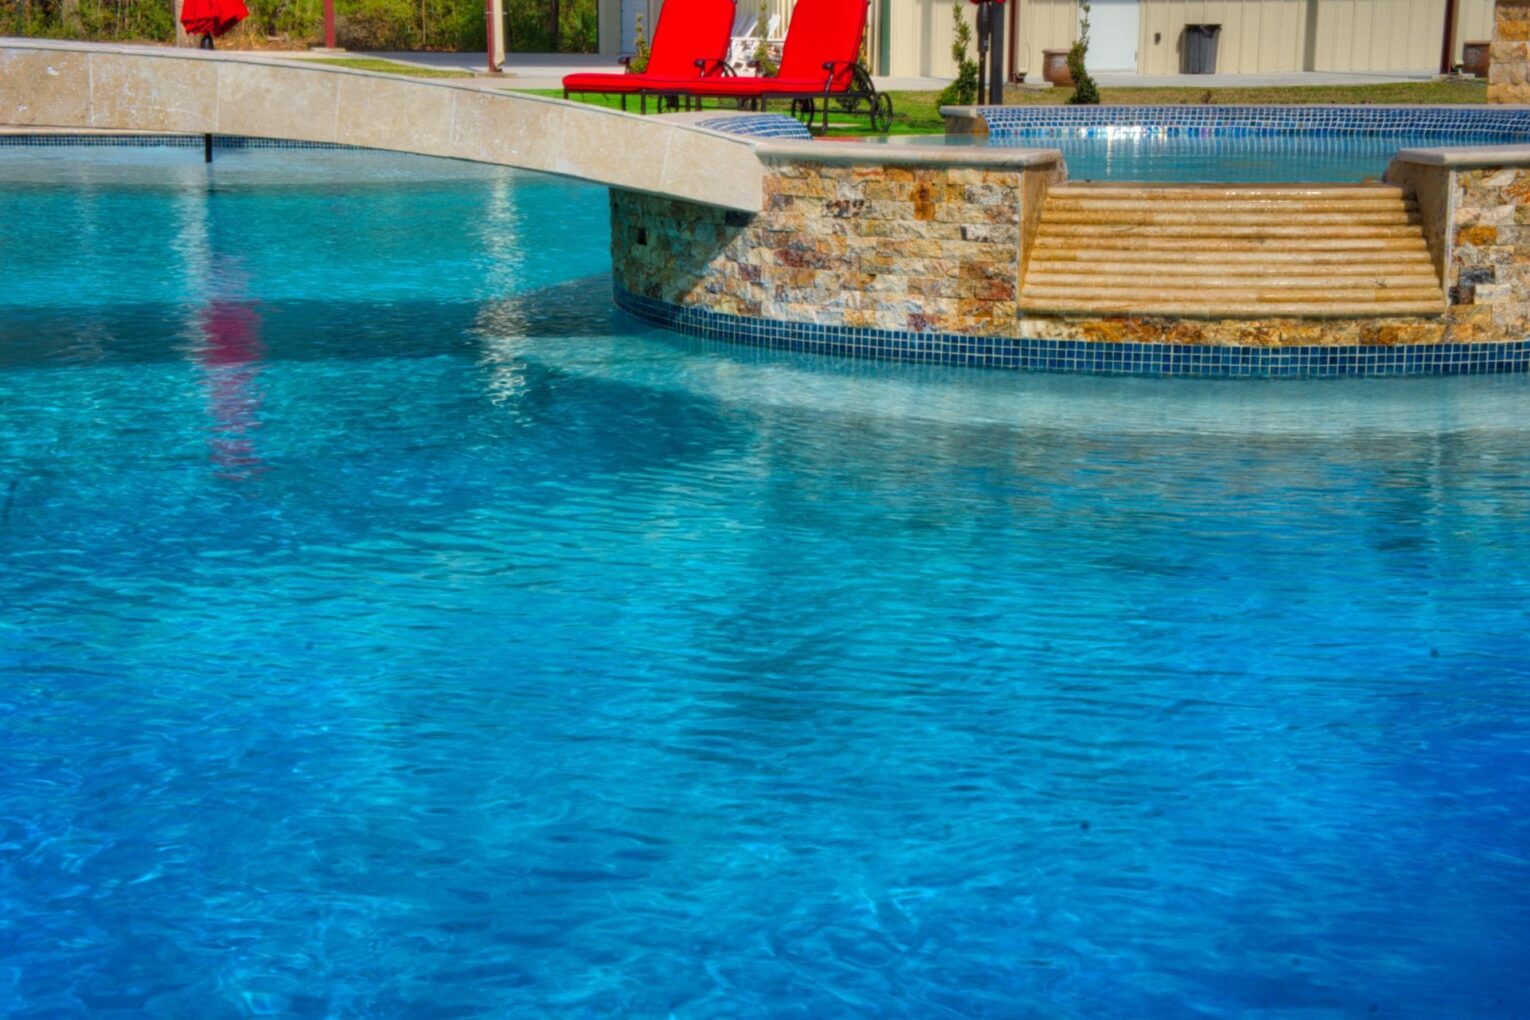 A pool with a red chair and a stone wall.